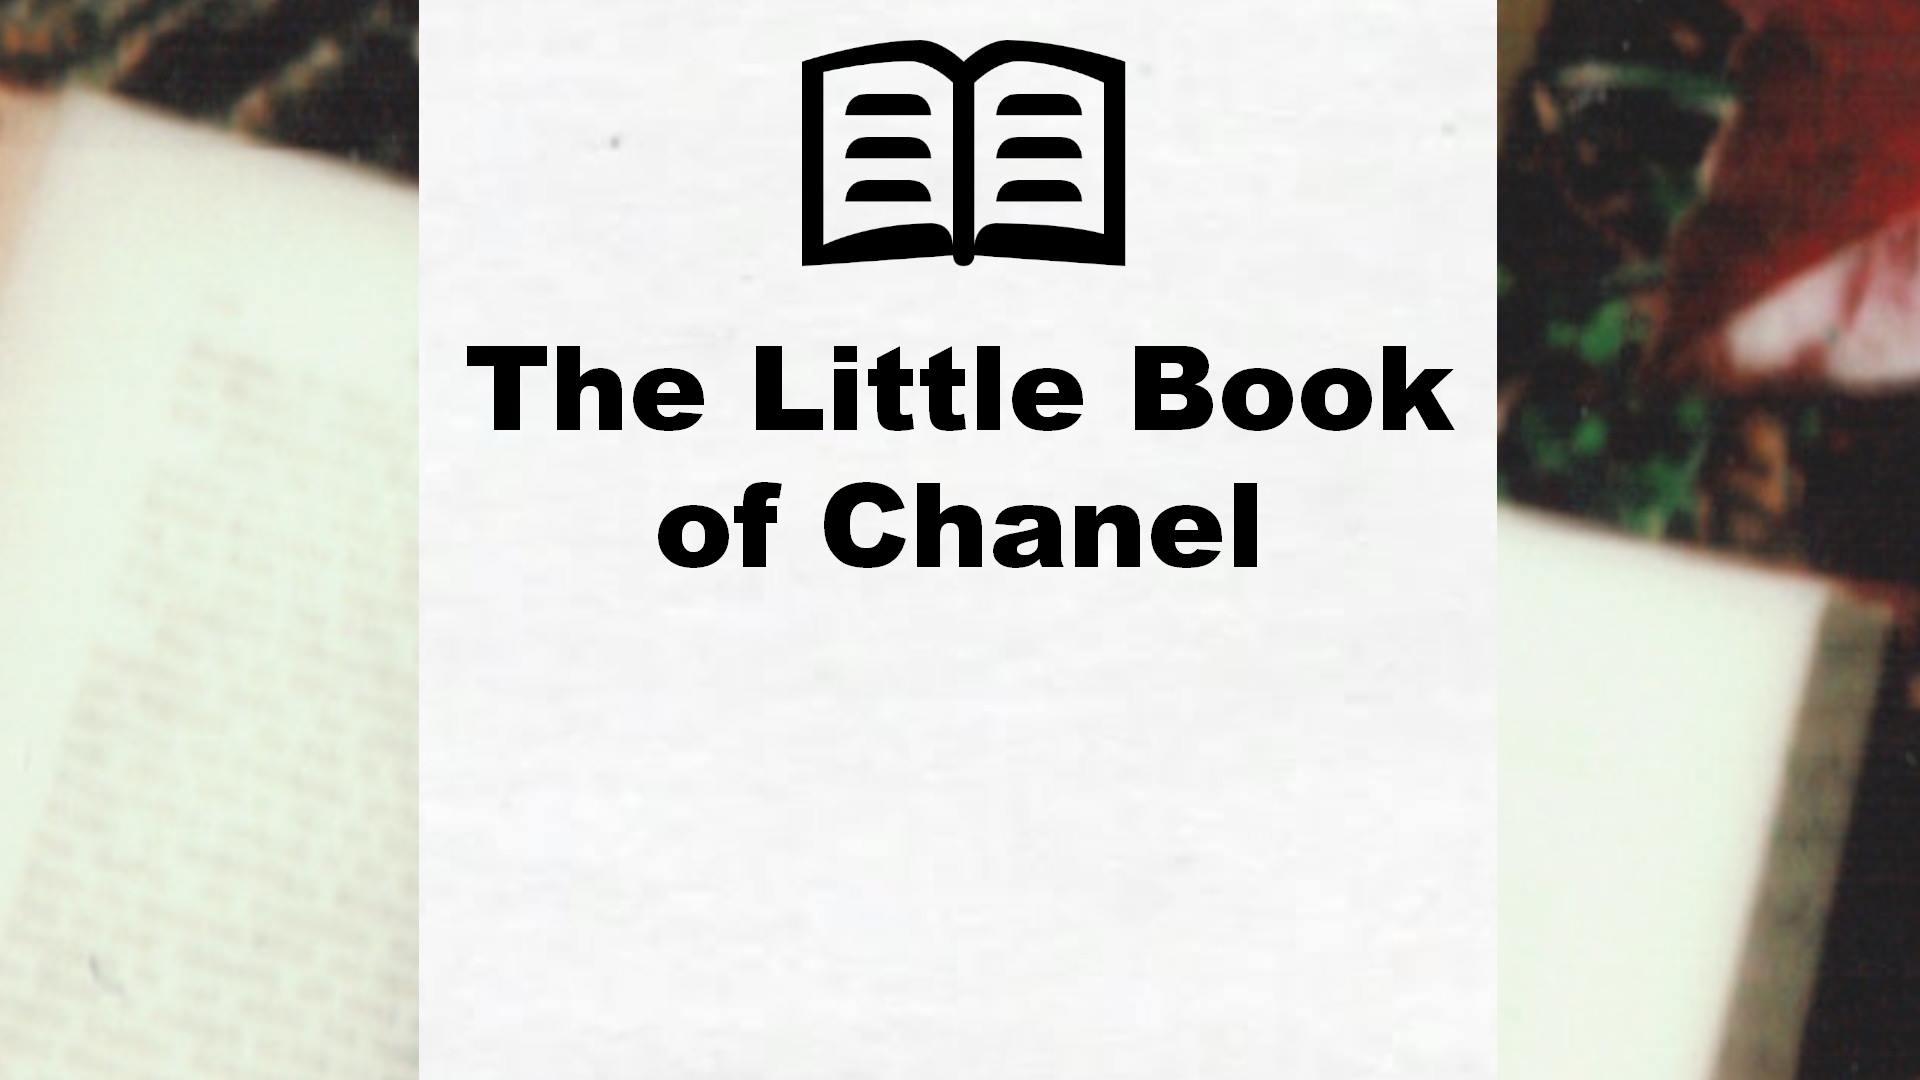 The Little Book of Chanel – Critique